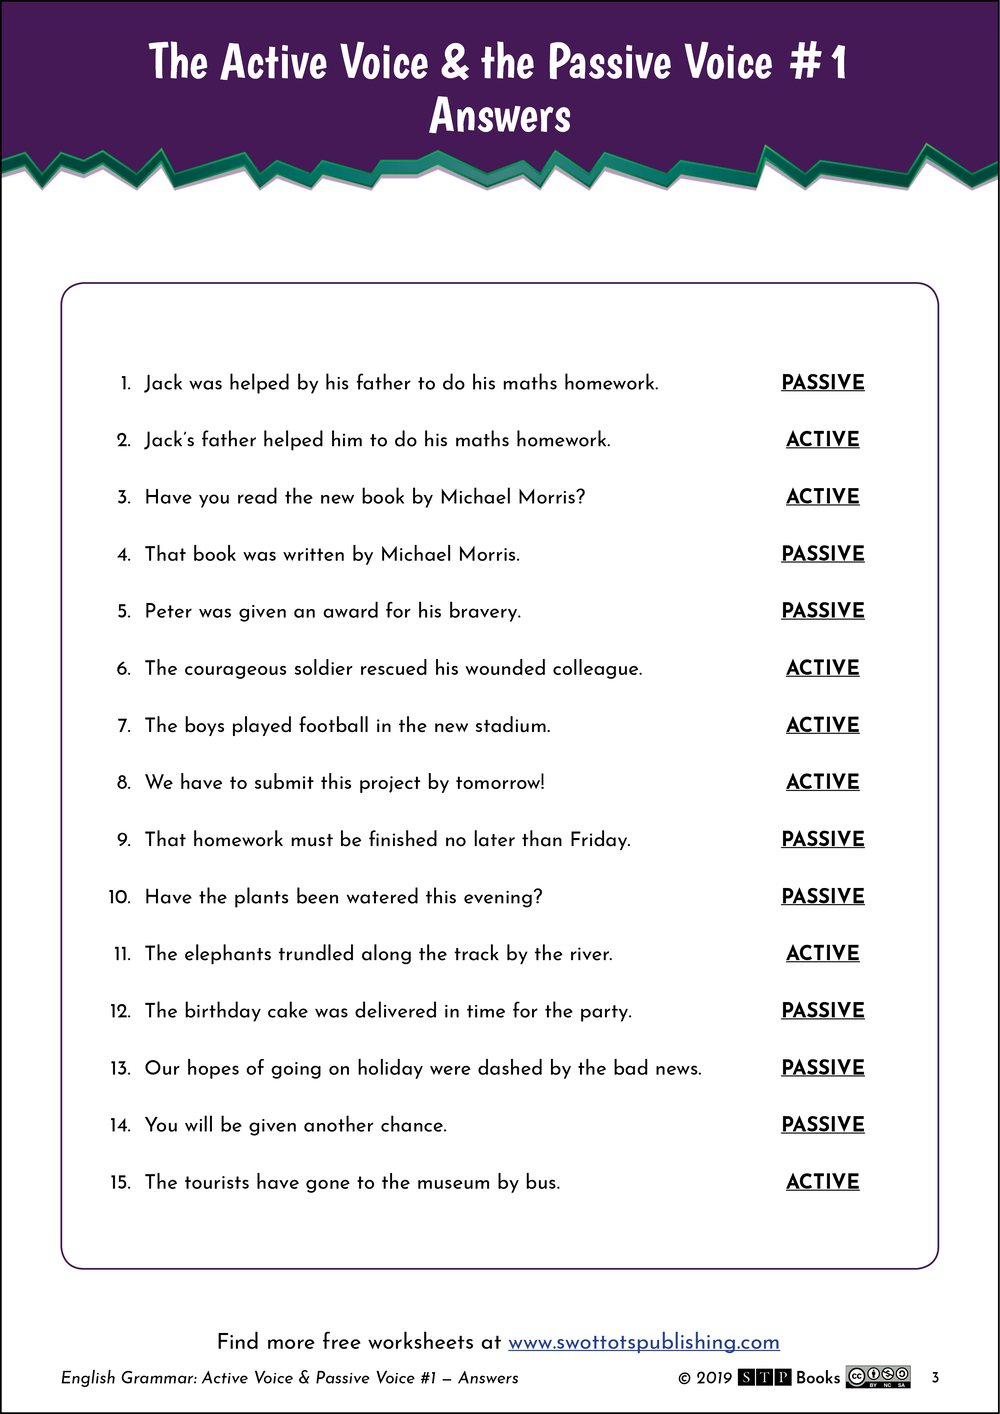 Active and passive voice exercises with answers pdf download adobe photoshop cs6 free download full version for windows 8